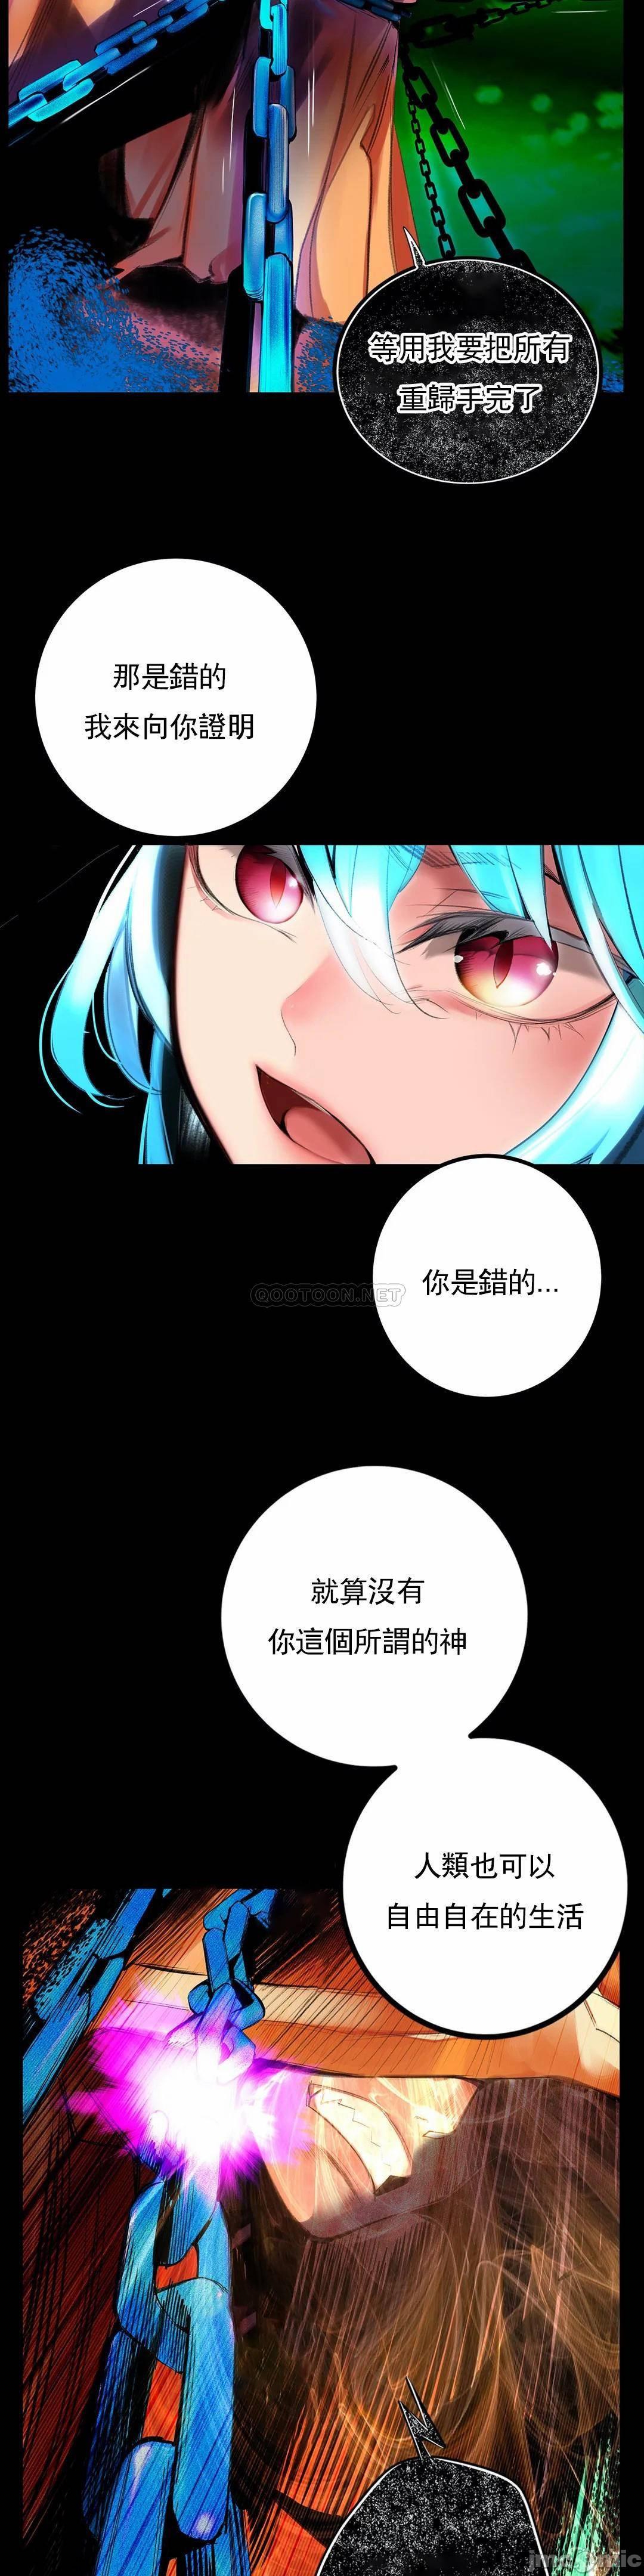 [Juder] Lilith`s Cord (第二季) Ch.77-93 end [Chinese] 444